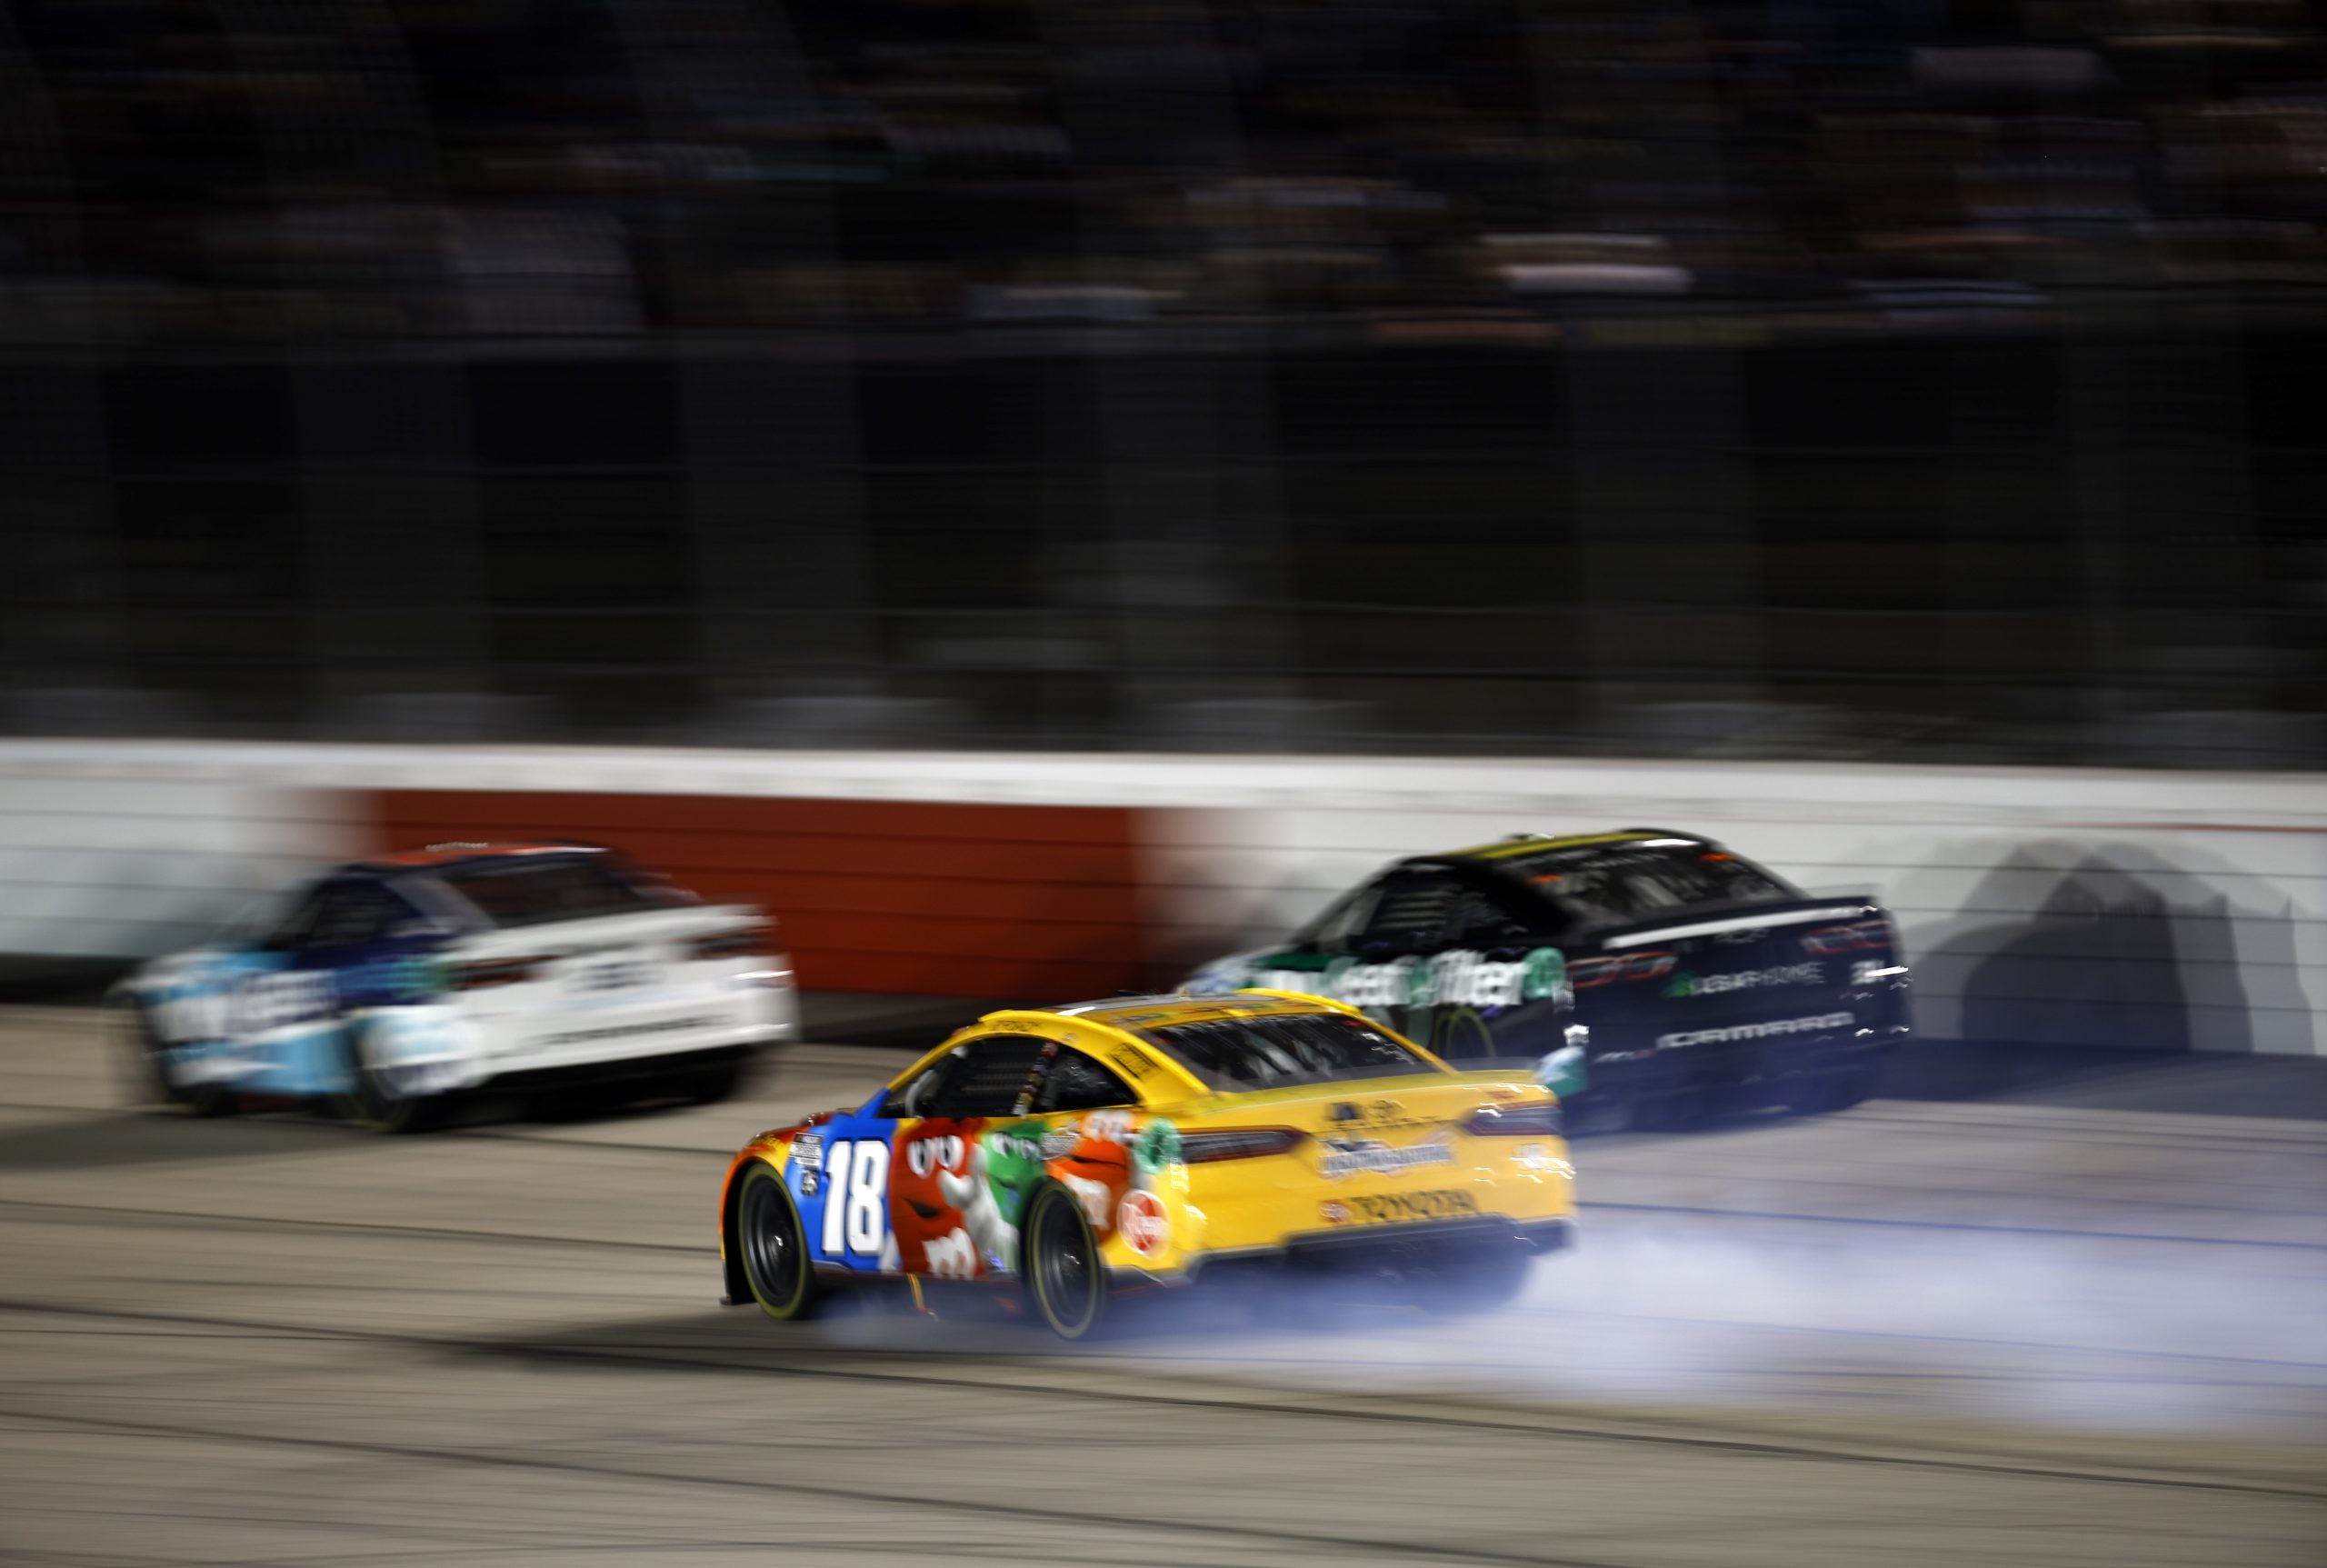 Kyle Busch's No. 18 car suffers an engine failure during the 2022 Southern 500.